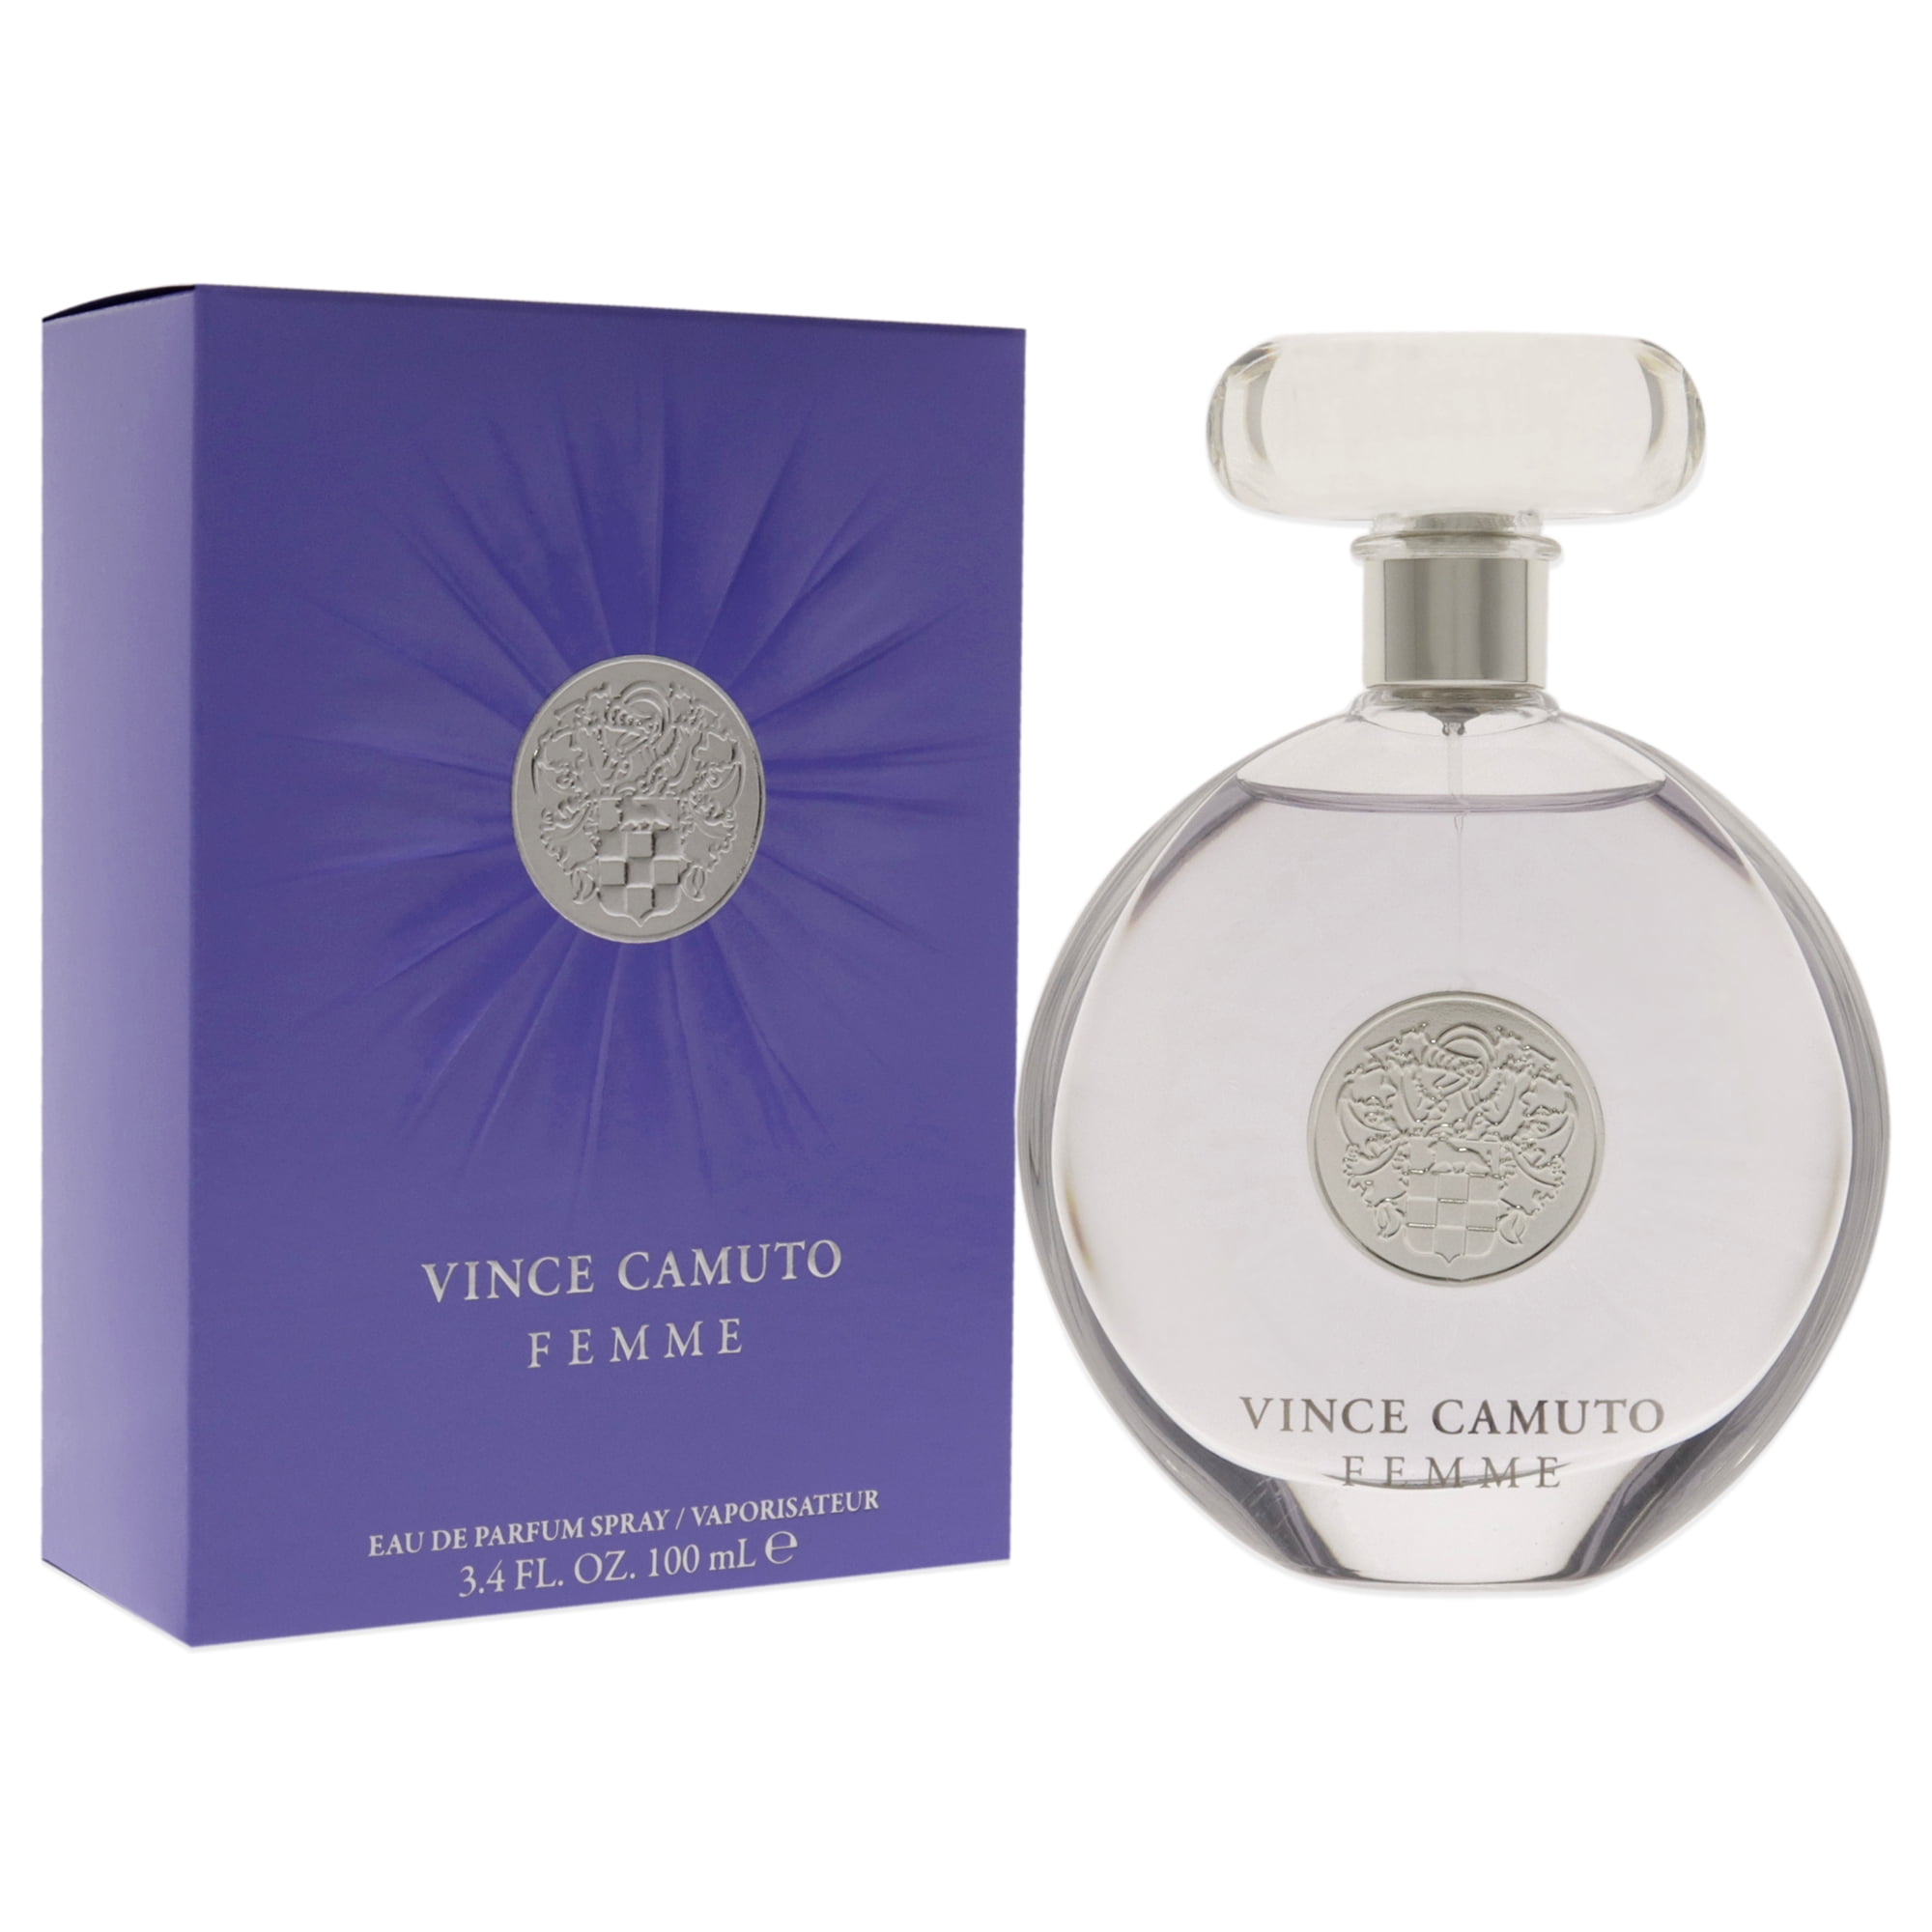 Woman Perfume Neutral Fragrance 100ml 13 Options Contre Moi Dans La Peau  Spell On You EDP Fast Postage From Perfumehome, $19.68